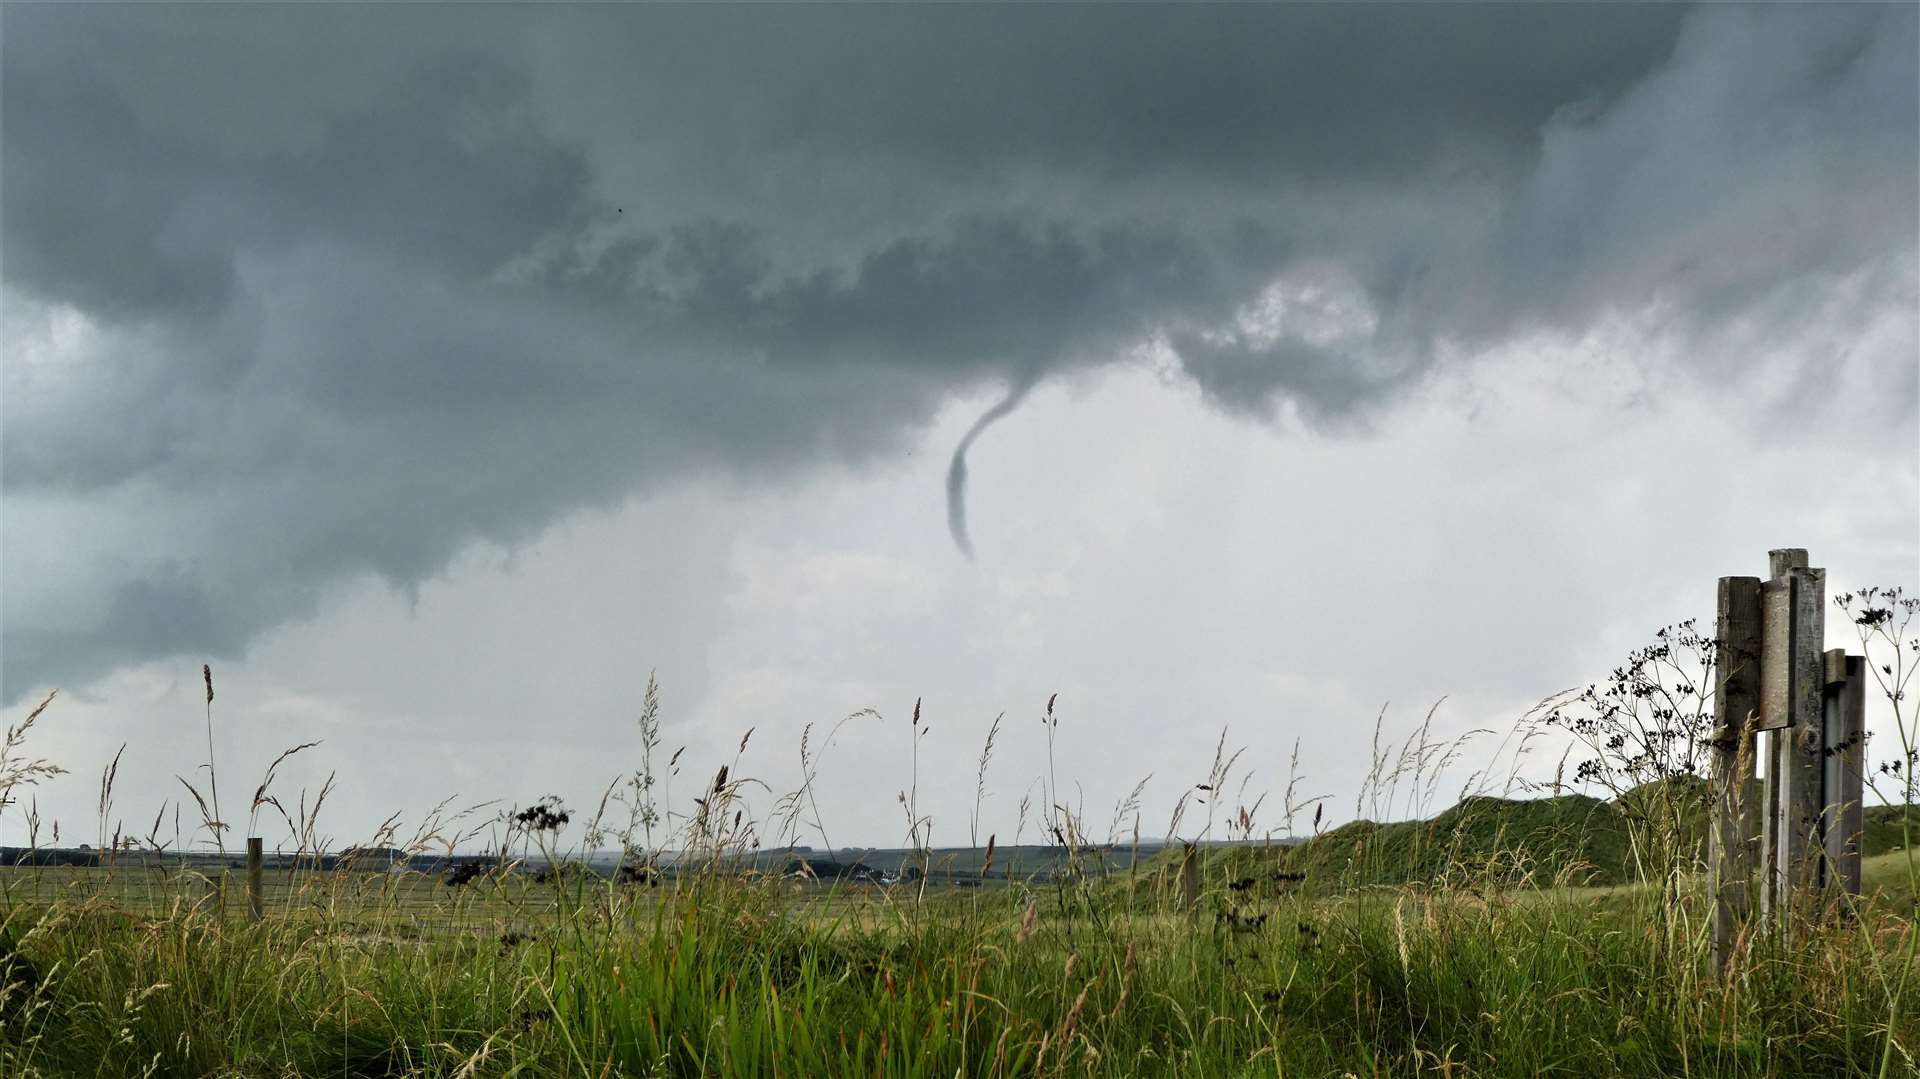 What appears to be a funnel cloud seen near Castletown today by Suzie Hay.